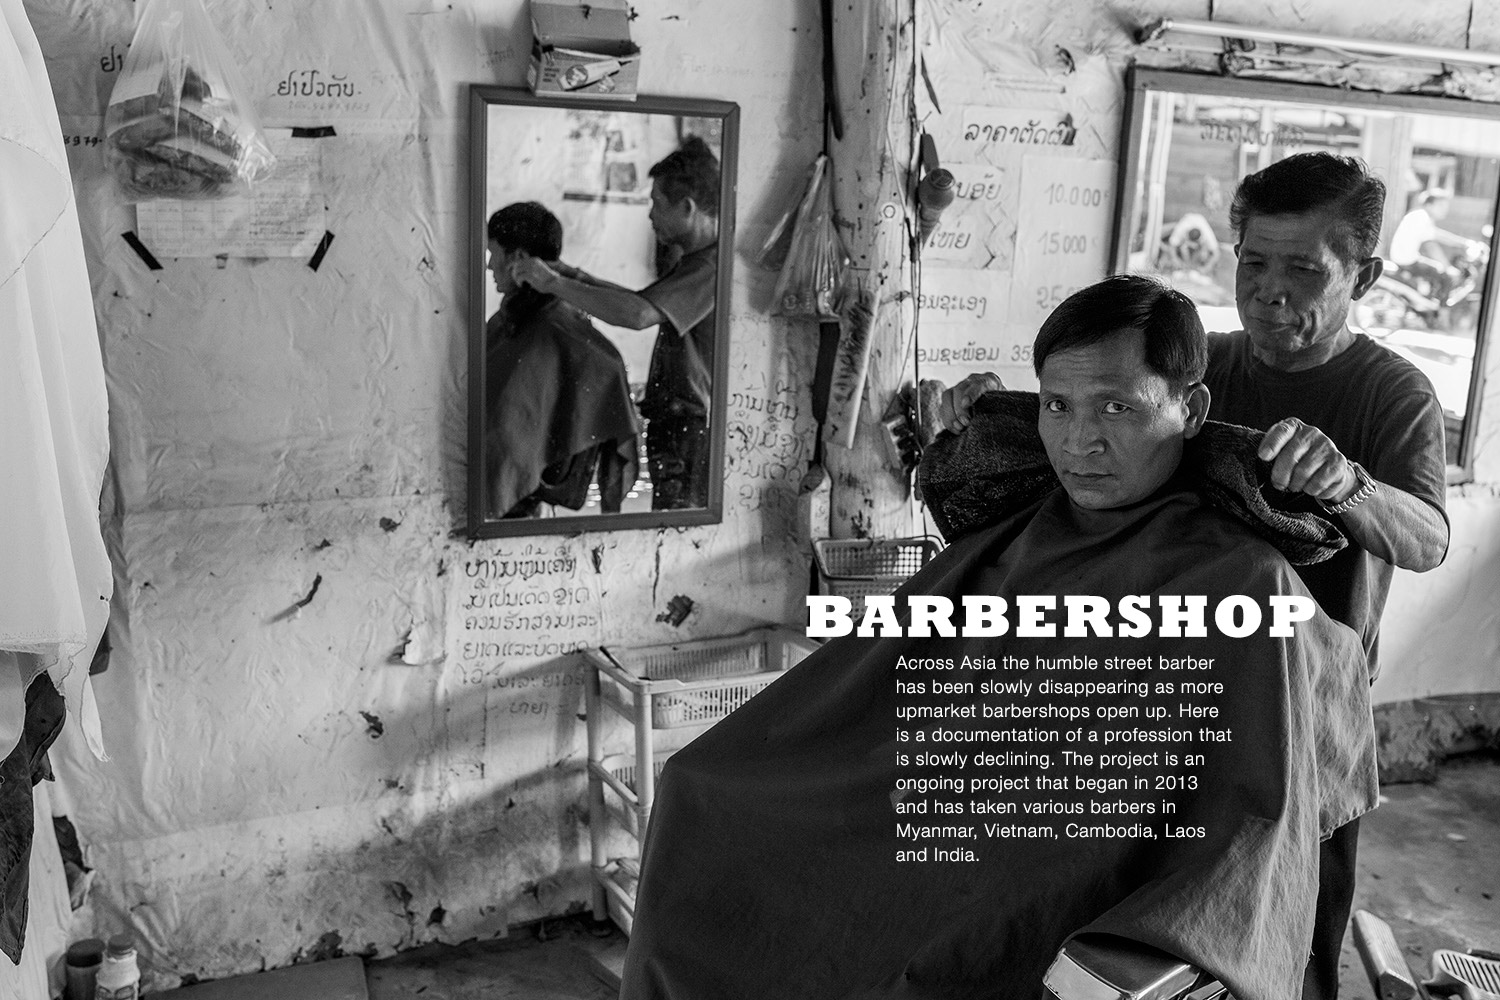 Barbers-of-Asia-002-text.jpg